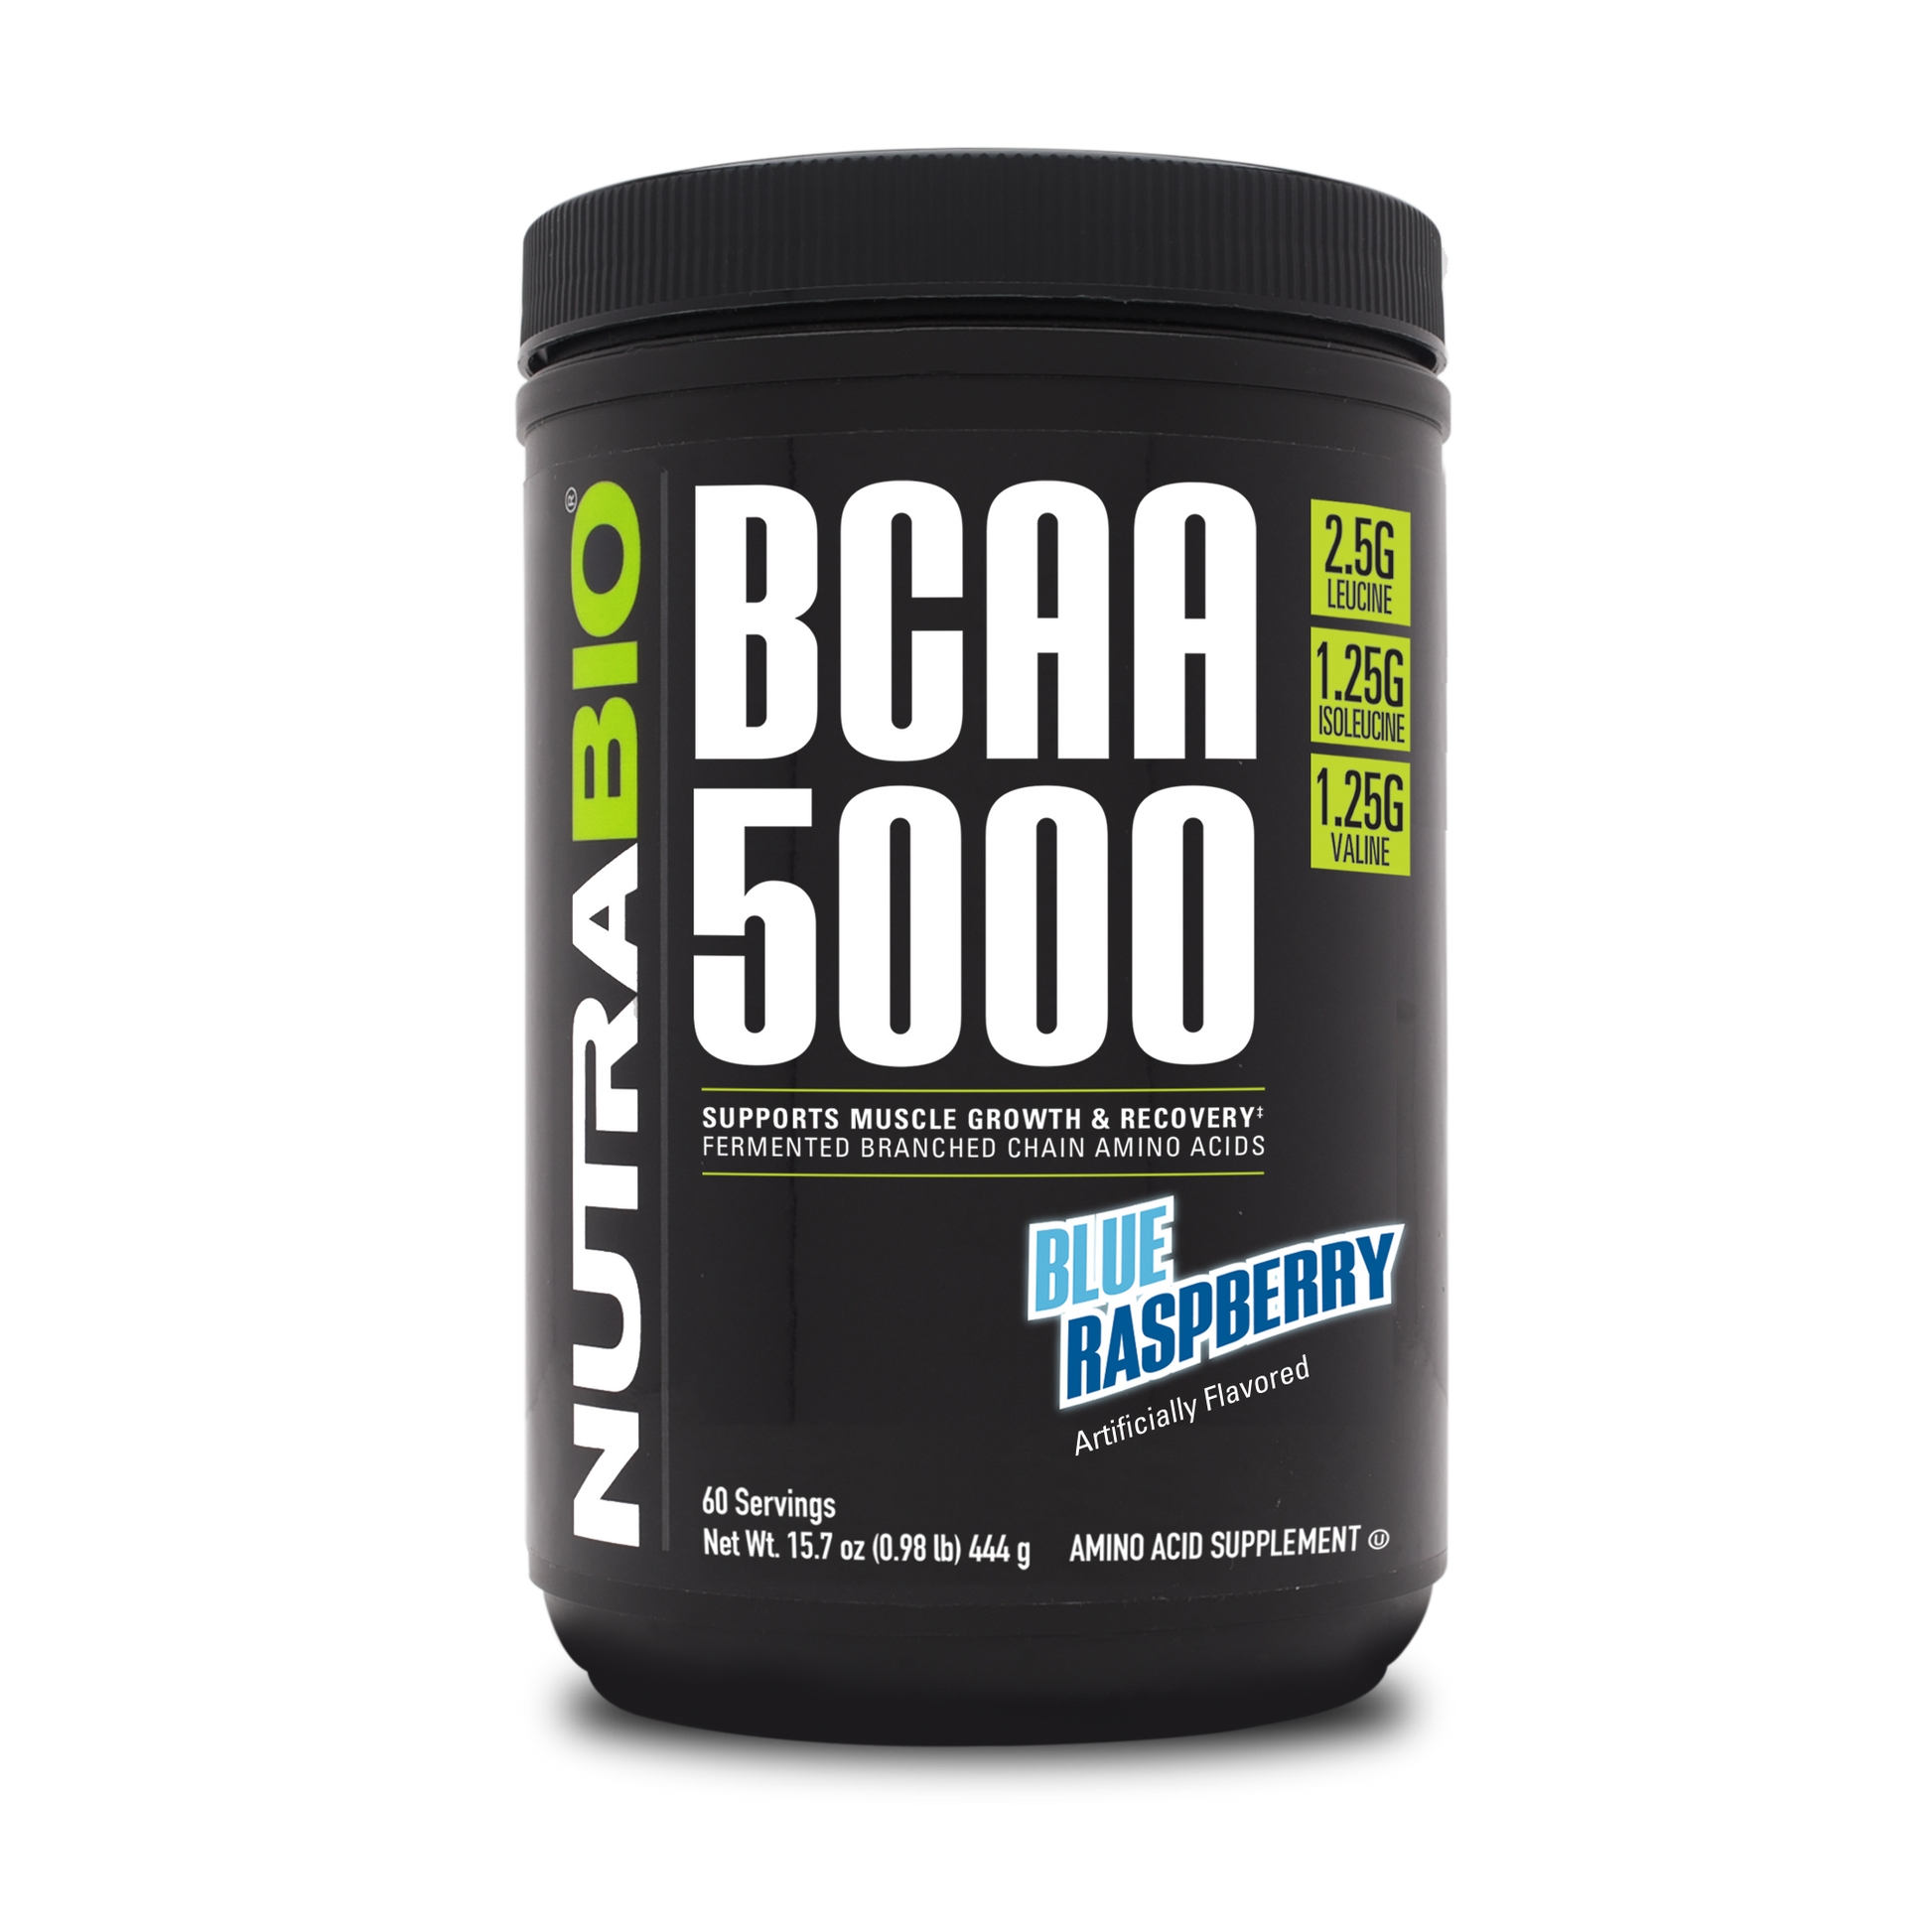 BCAA EXTREME - The Protein Works